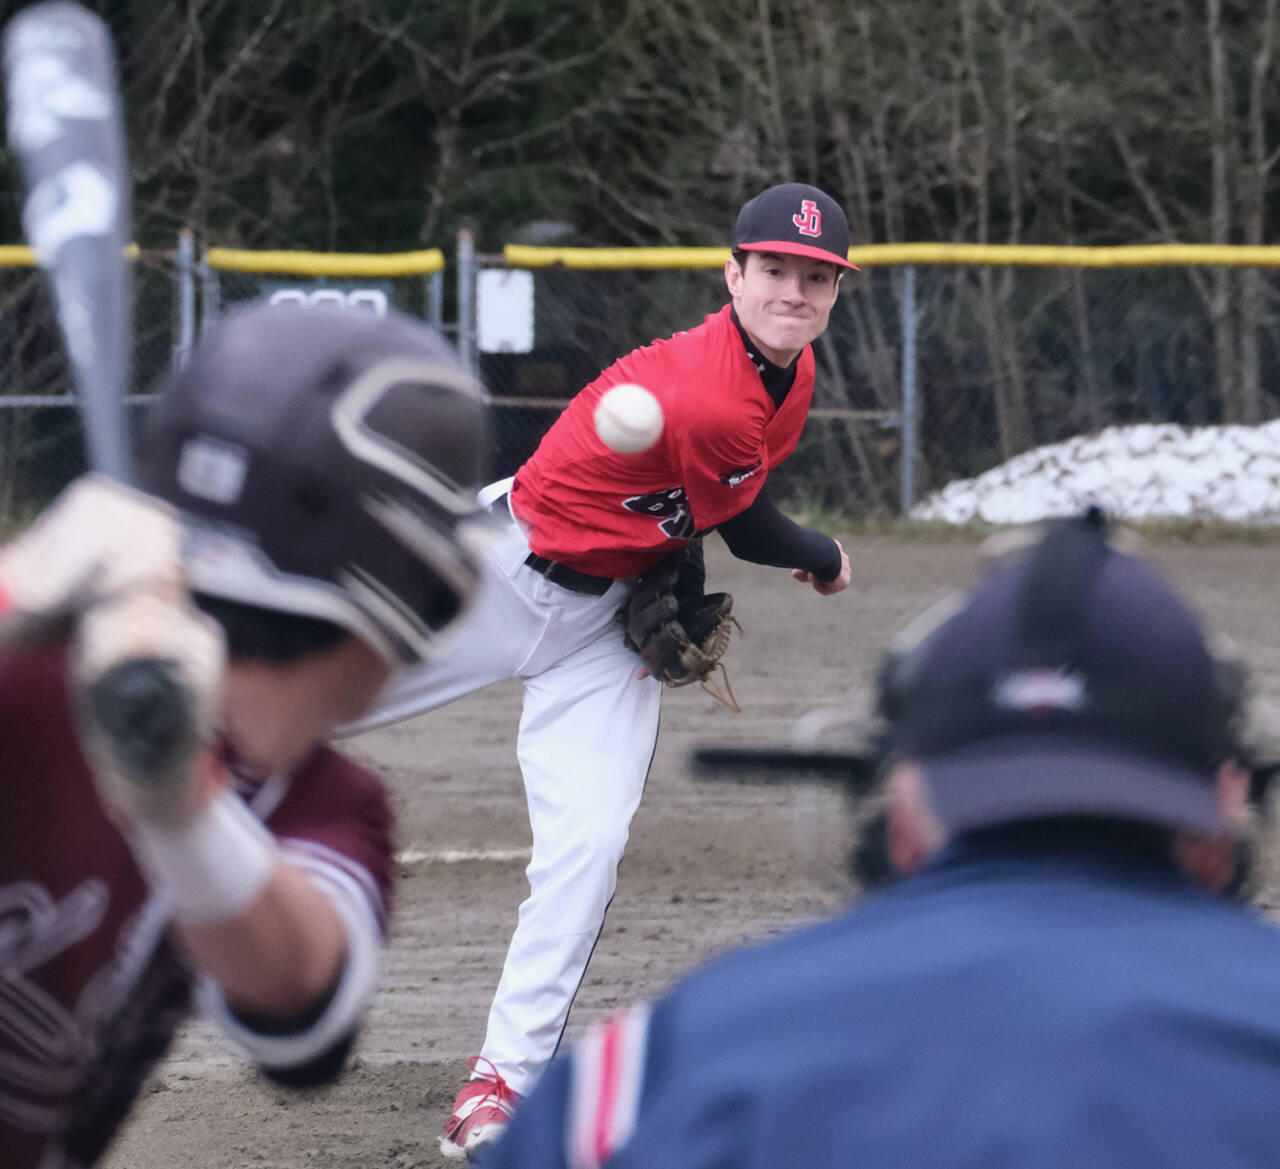 Juneau-Douglas High School: Yadaa.at Kalé senior pitcher Eli Crupi delivers against Ketchikan’s Colby Hanchey during the Crimson Bears 5-4 win over the visiting Kings on Friday at Adair Kennedy Field. (Klas Stolpe / Juneau Empire)